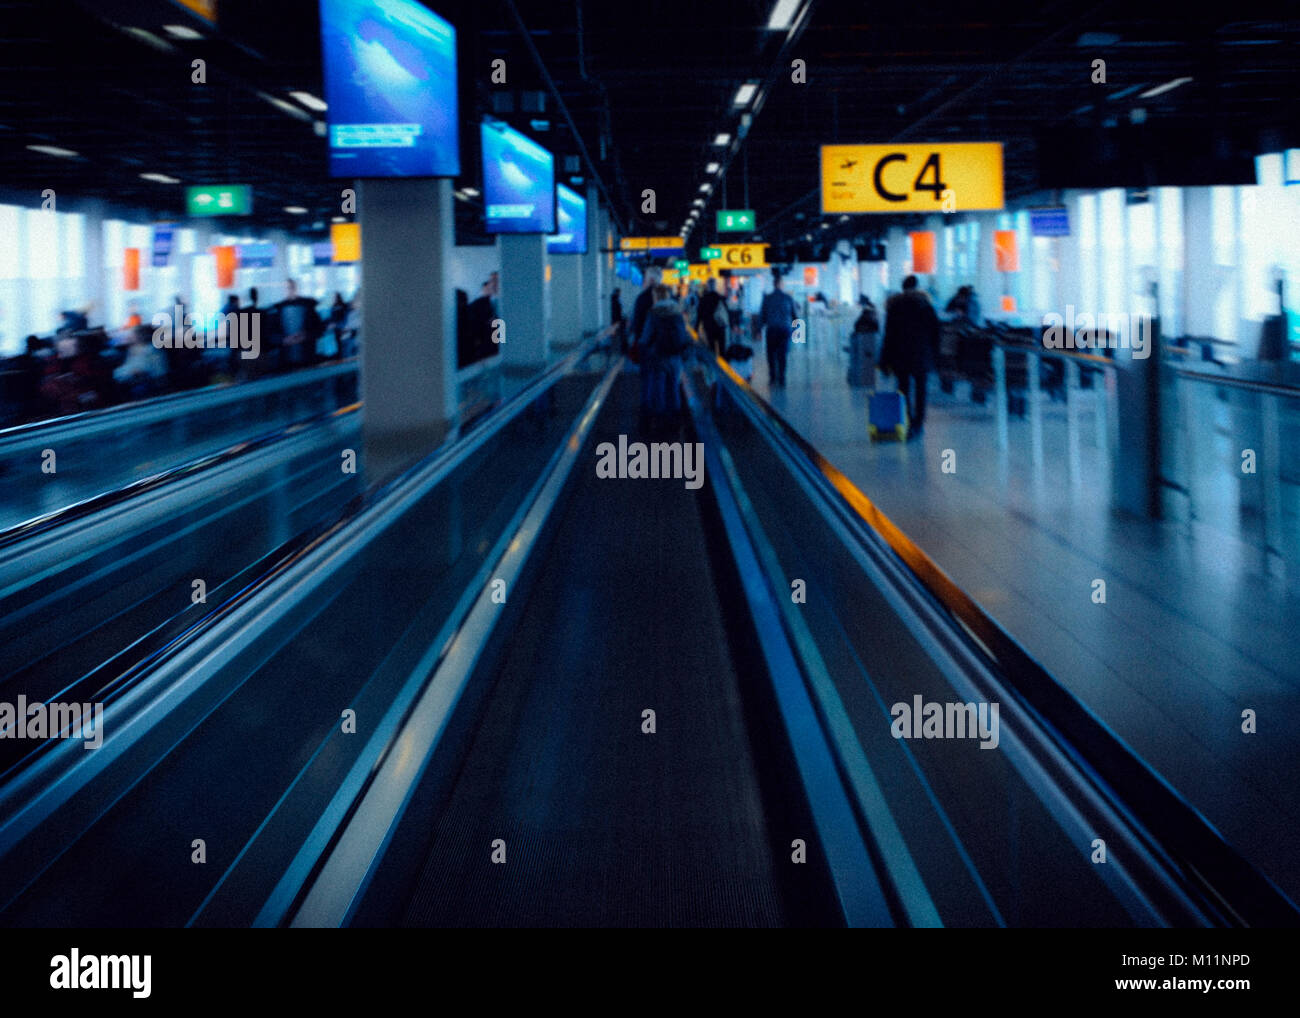 Airport and transportation concept of stressful situation, captured at Amsterdam's Schiphol Airport, Netherlands Stock Photo